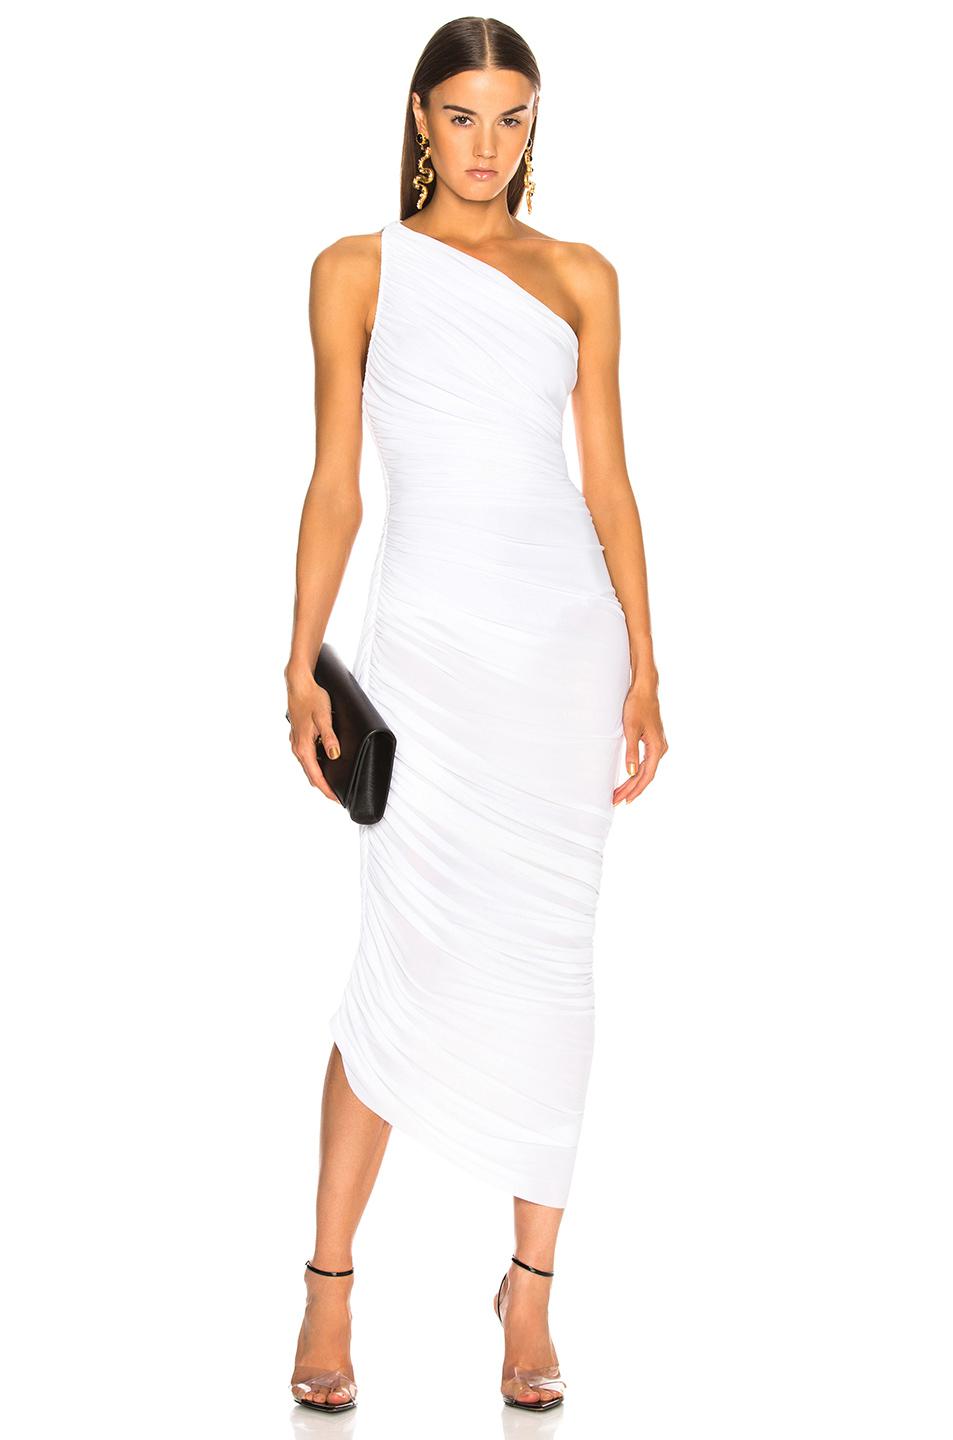 Norma Kamali Synthetic Diana Dress in White - Lyst